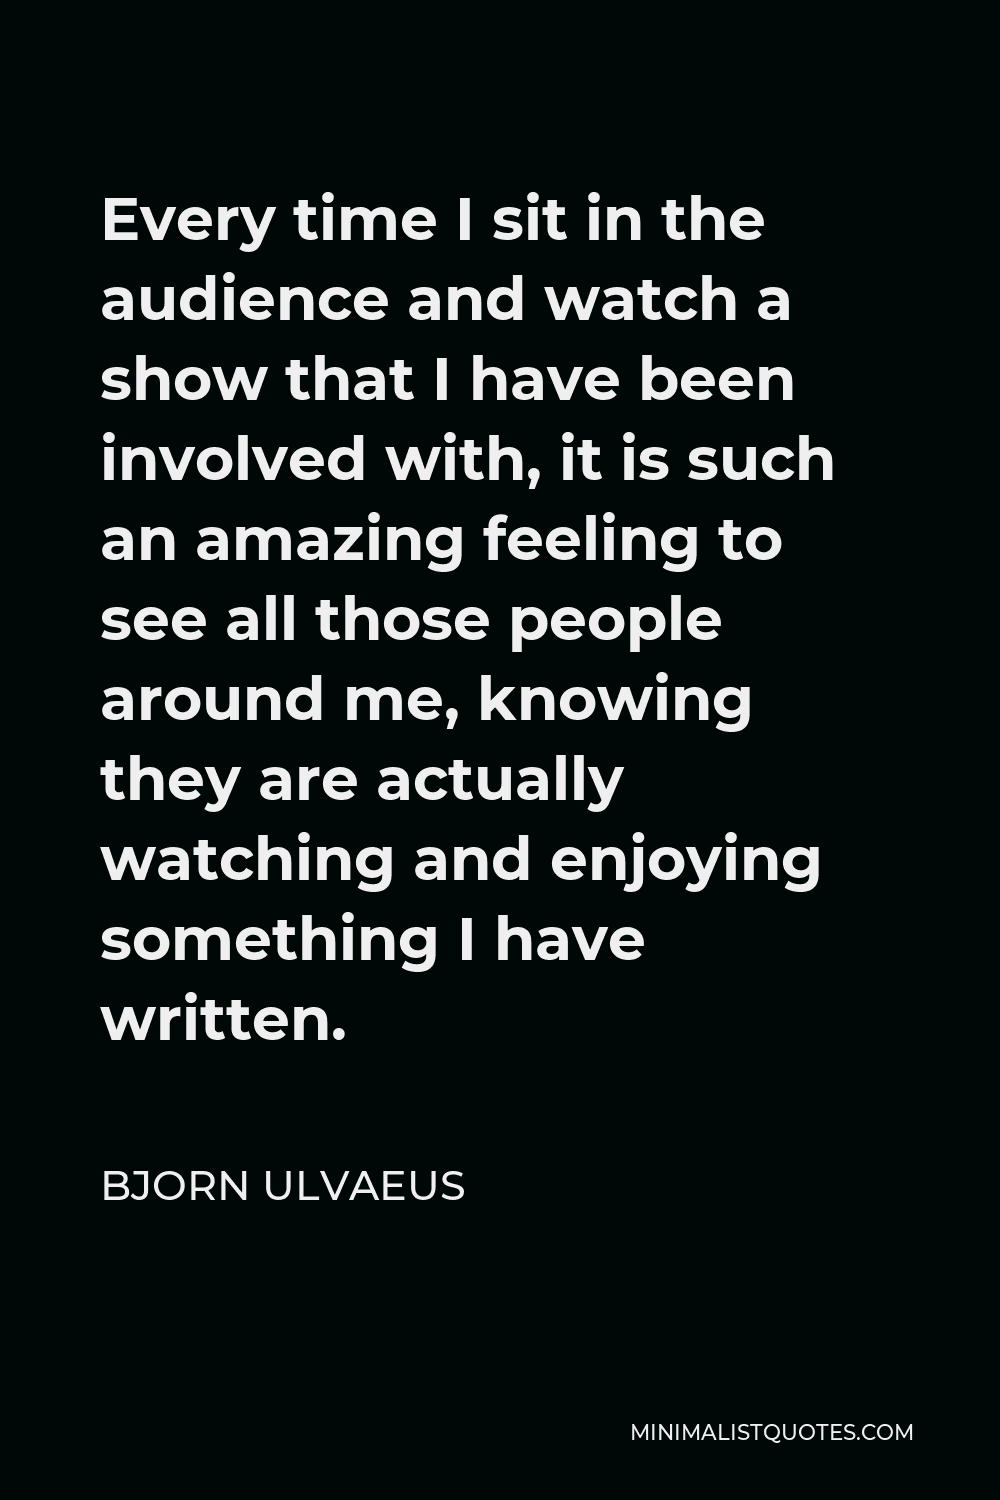 Bjorn Ulvaeus Quote - Every time I sit in the audience and watch a show that I have been involved with, it is such an amazing feeling to see all those people around me, knowing they are actually watching and enjoying something I have written.